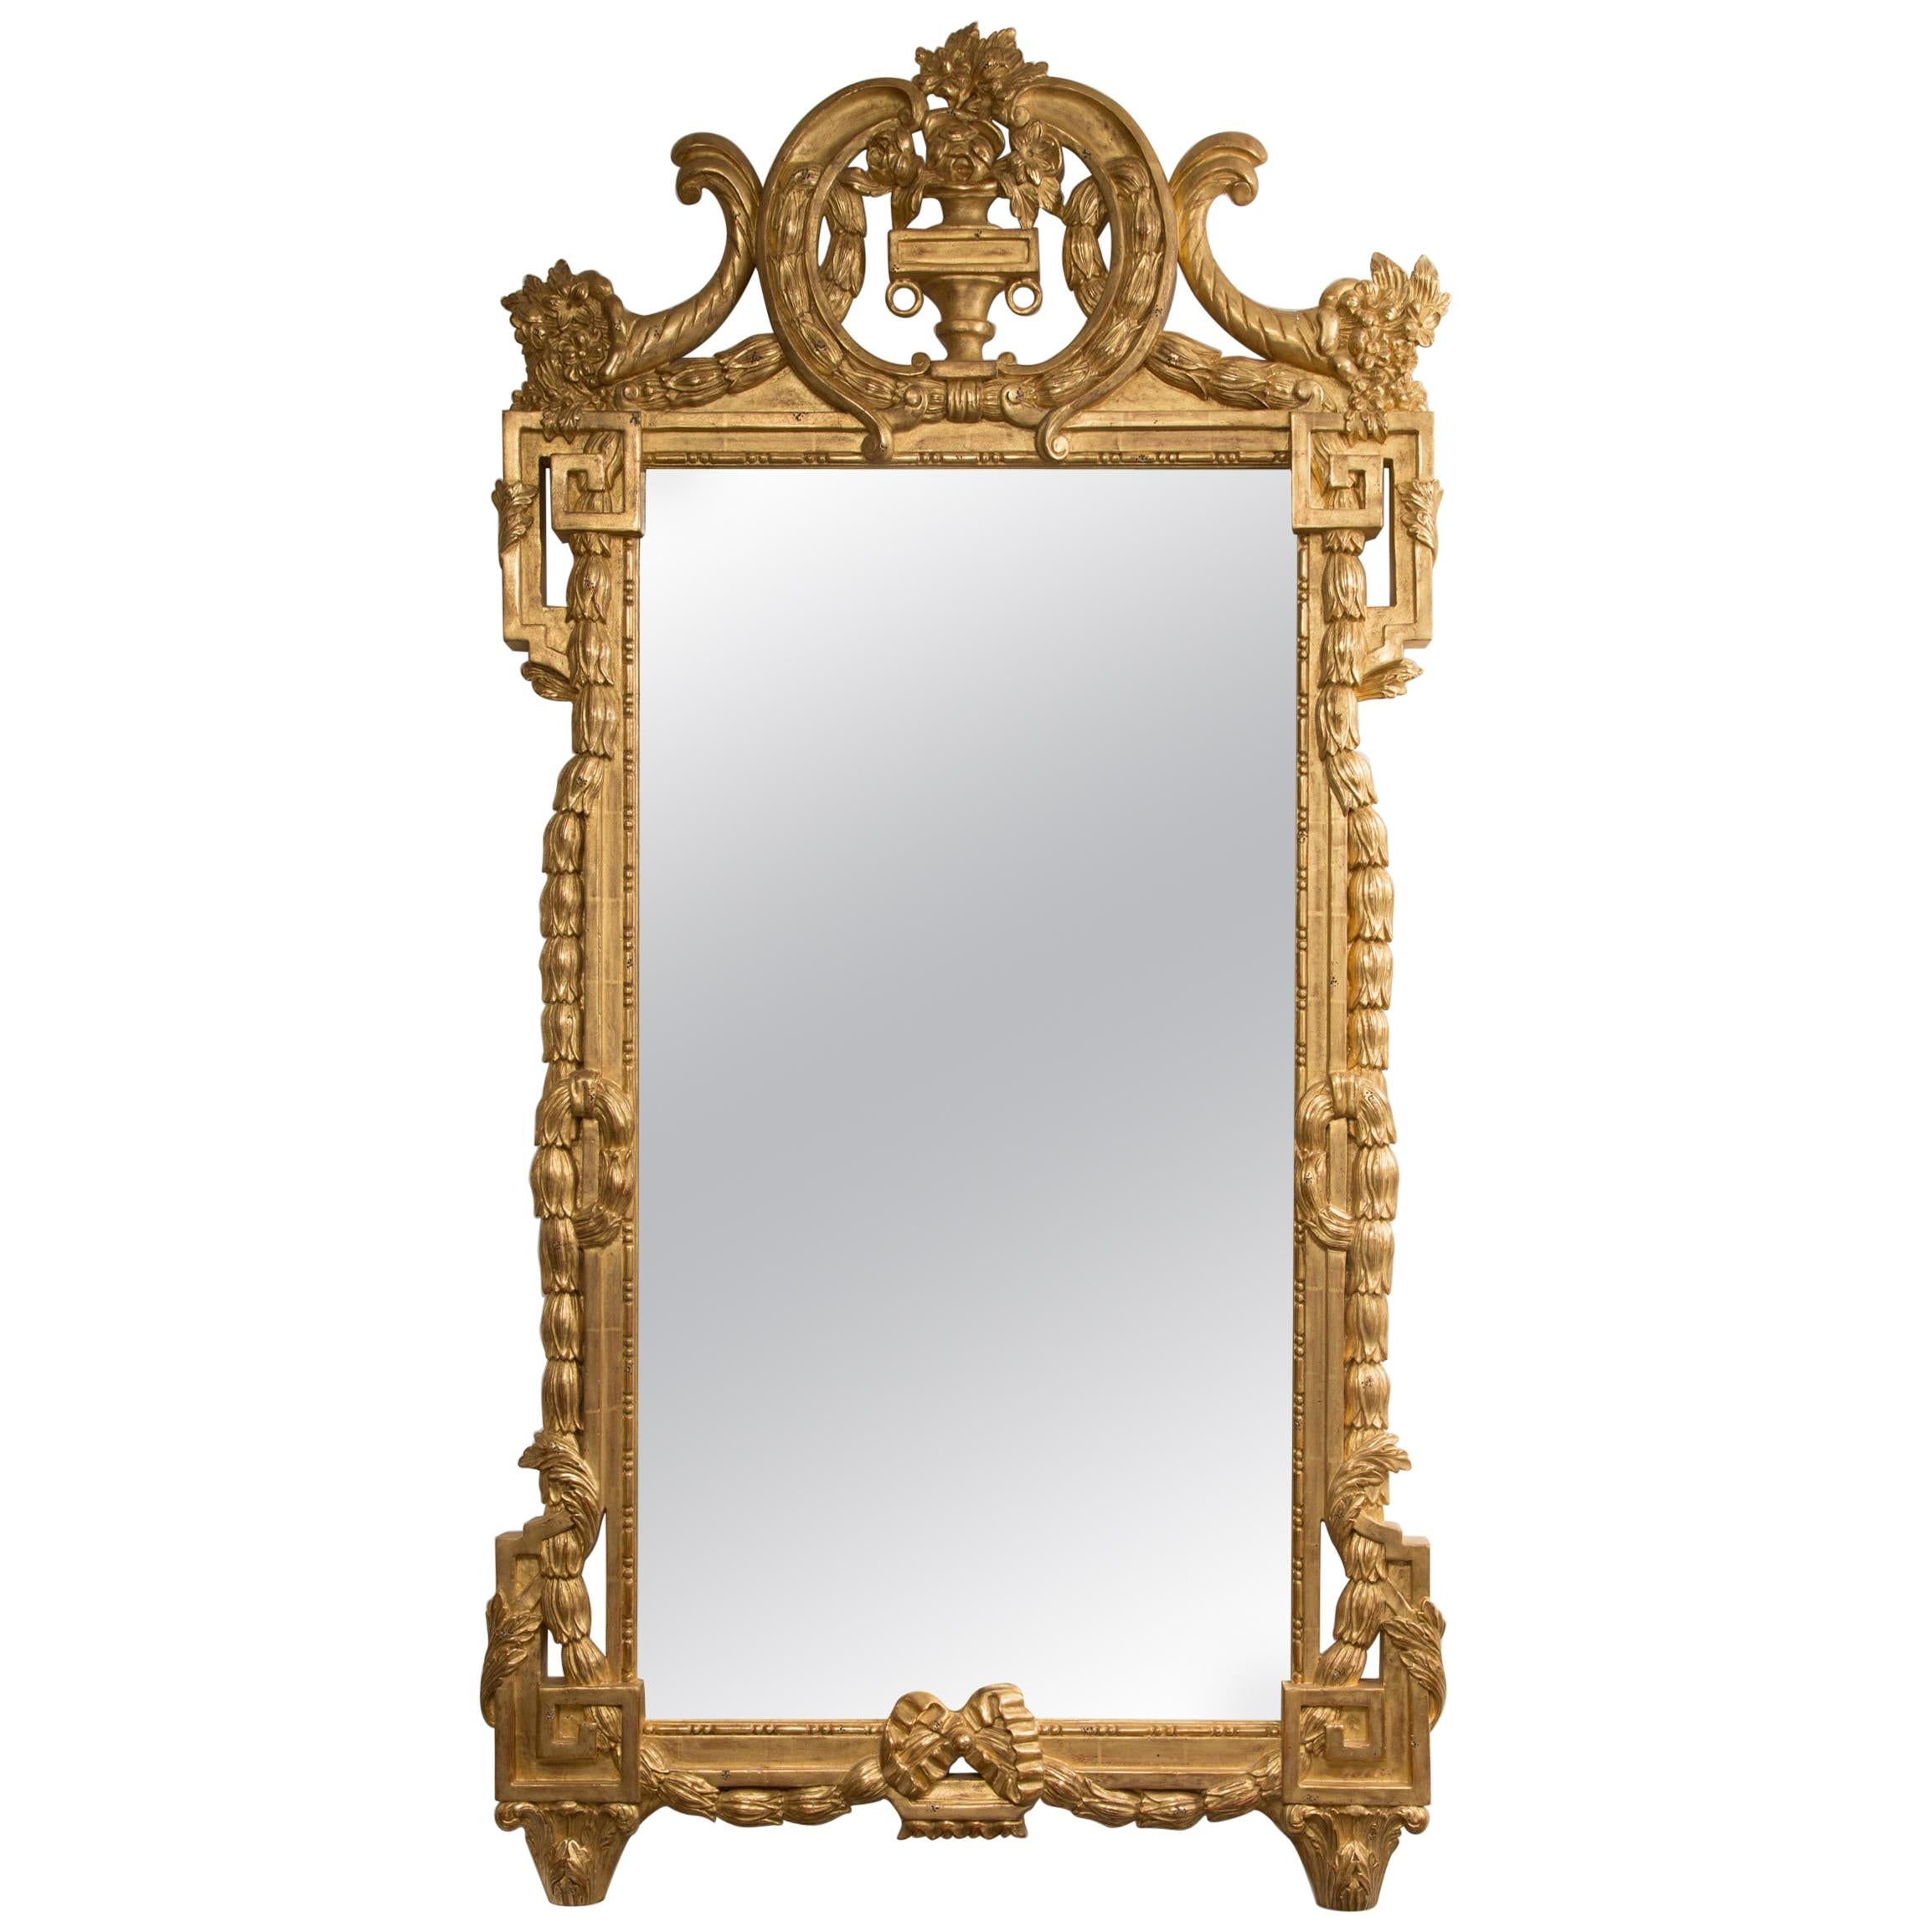 One of a Pair of Carved Giltwood Italian Wall Mirrors